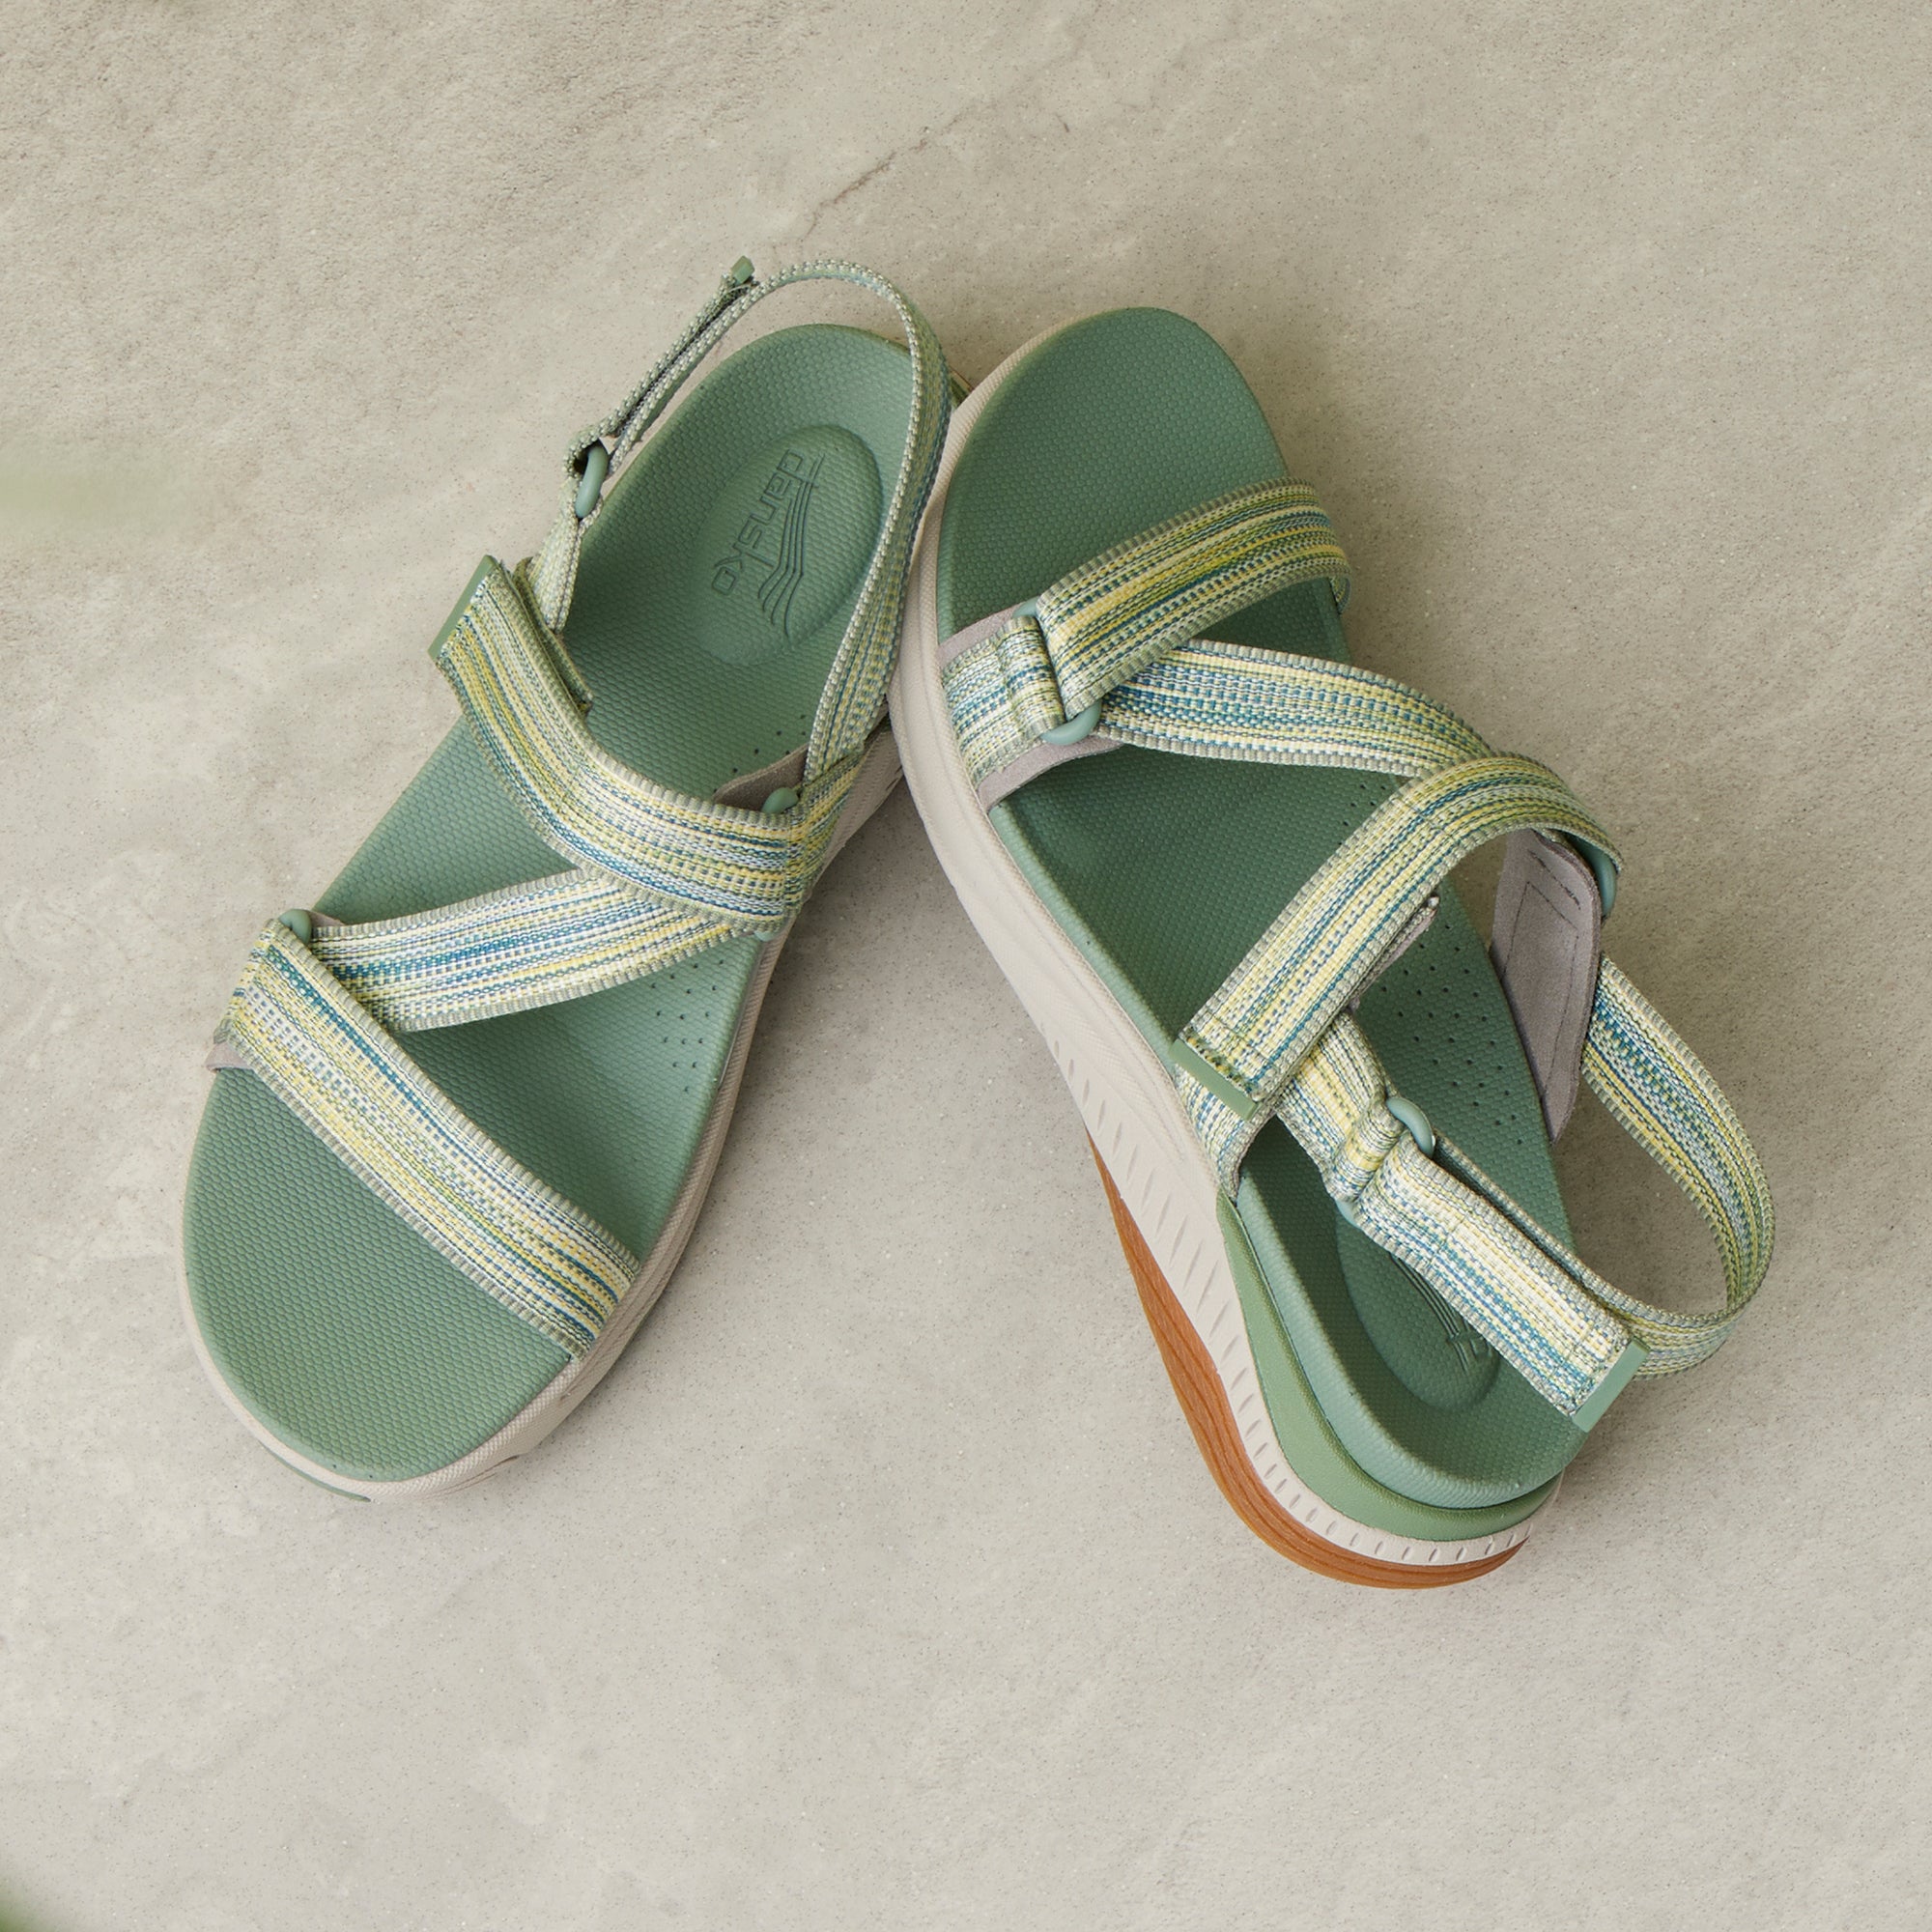 A detailed footbed and strap image of green walking sandals.